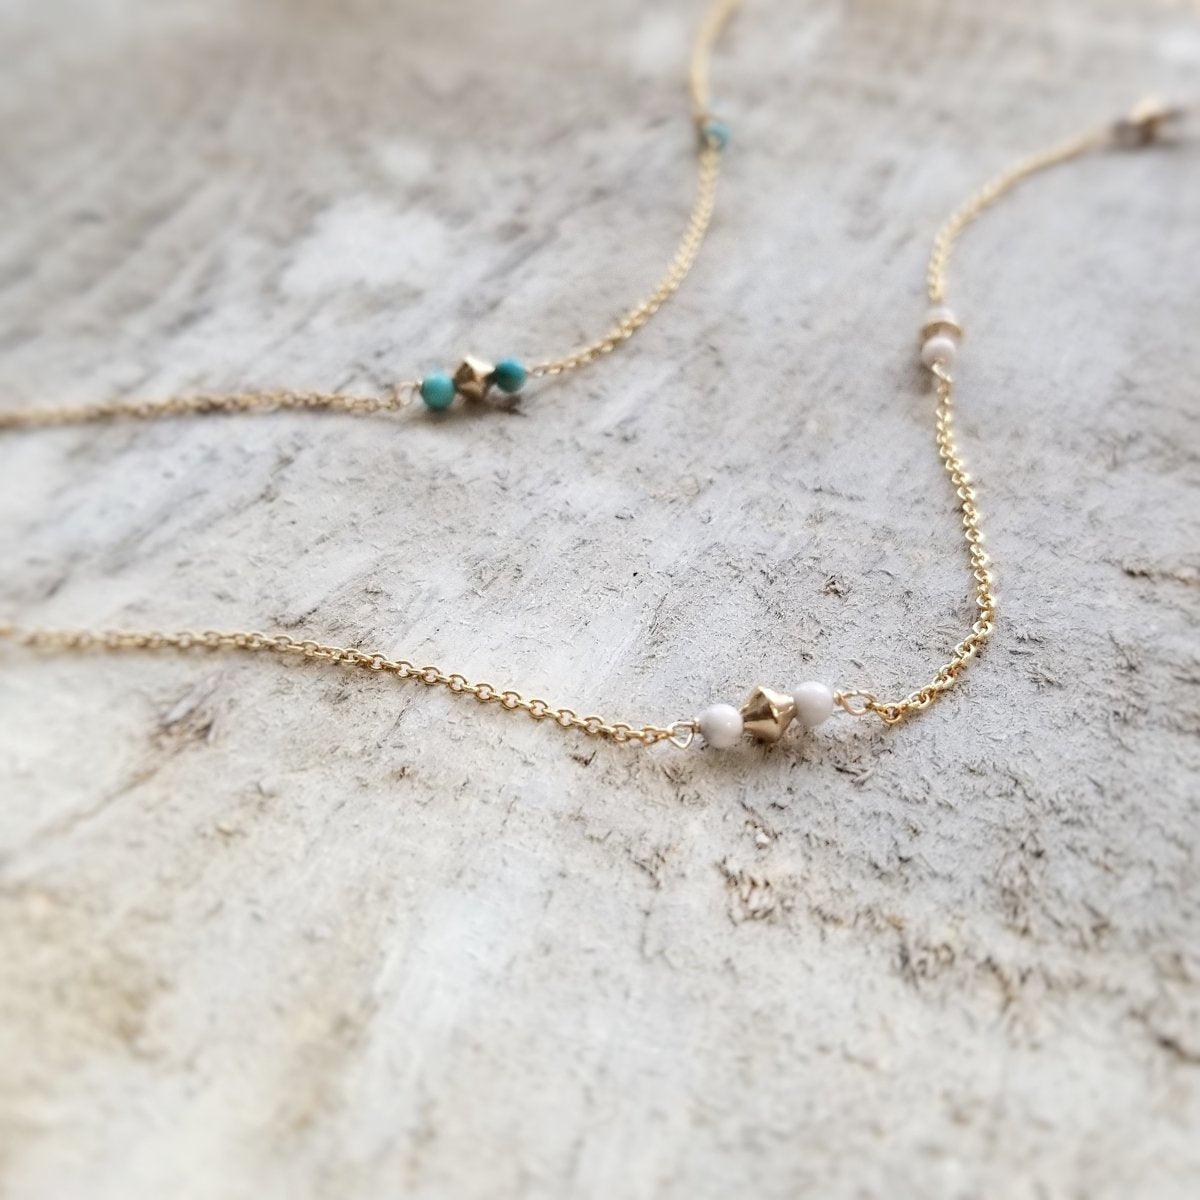 14k Gold & Turquoise Beaded Anklet - The Smart Minimalist